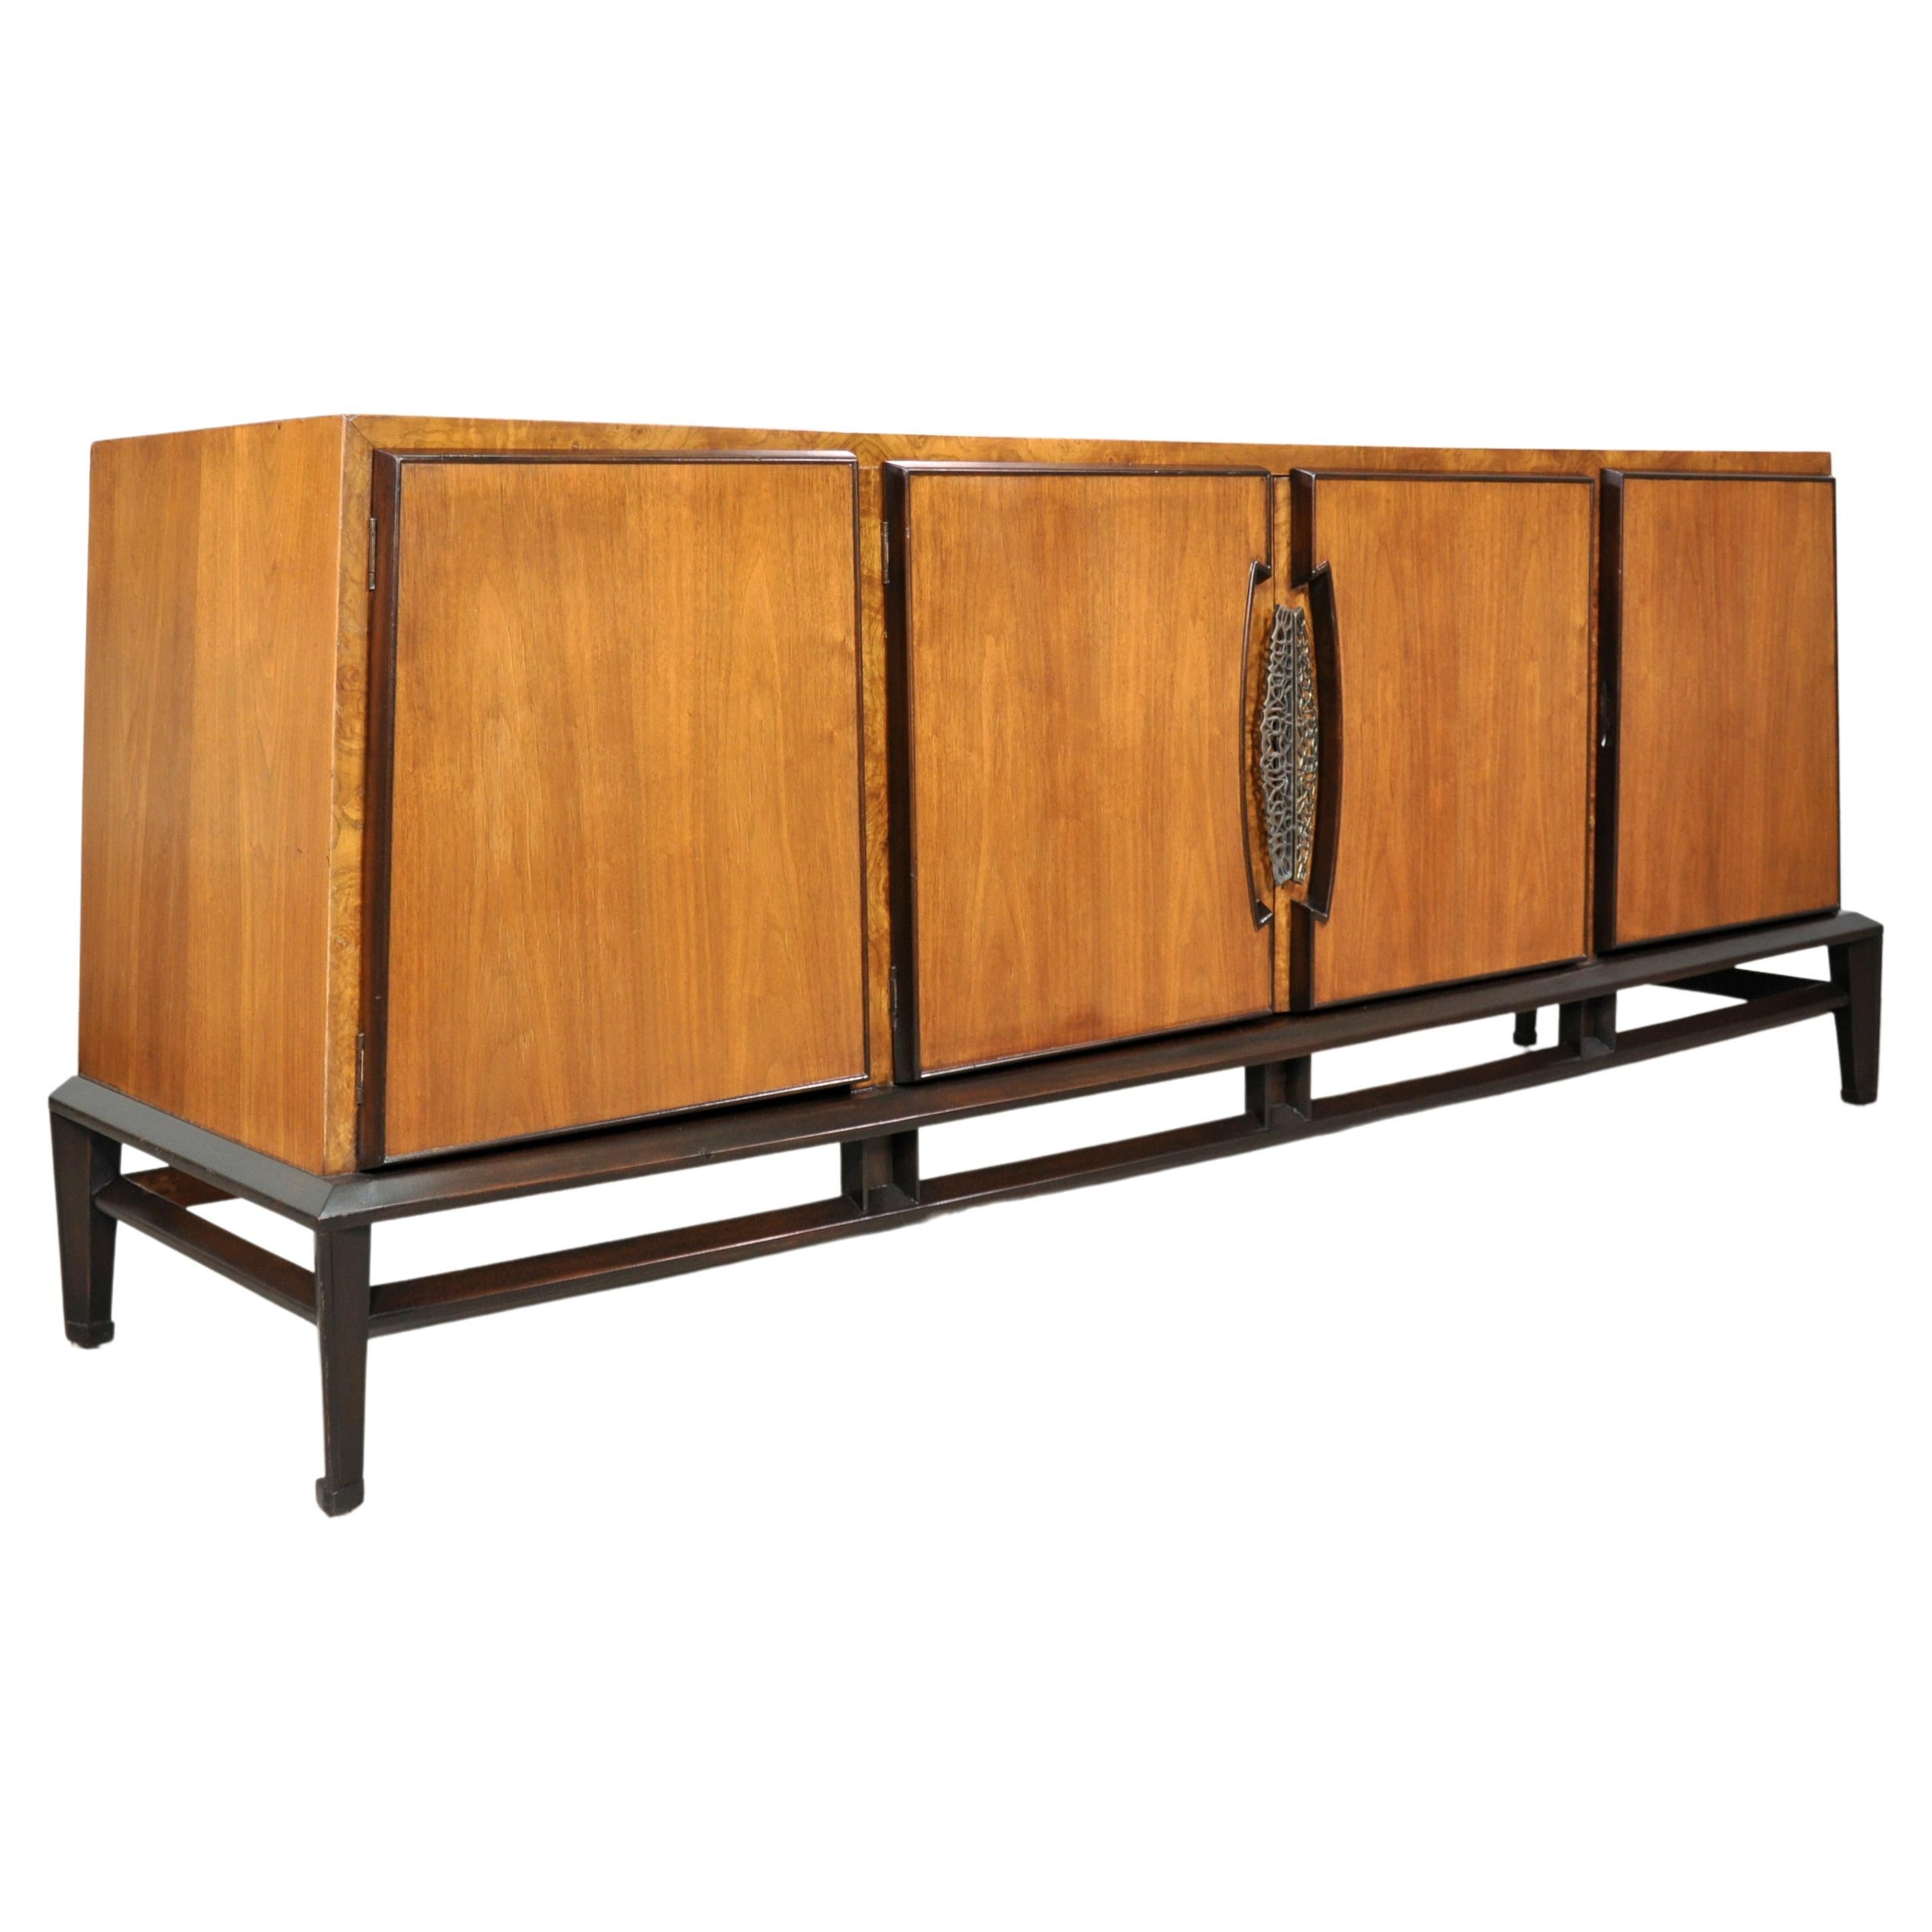 A stunning vintage triple dresser designed by wife and husband team Helen and Hobey Baker for Baker Furniture. The Mid-Century Modern cabinet features a two-toned, Asian inspired, sleek walnut frame with burl accents and brass hardware. With a total